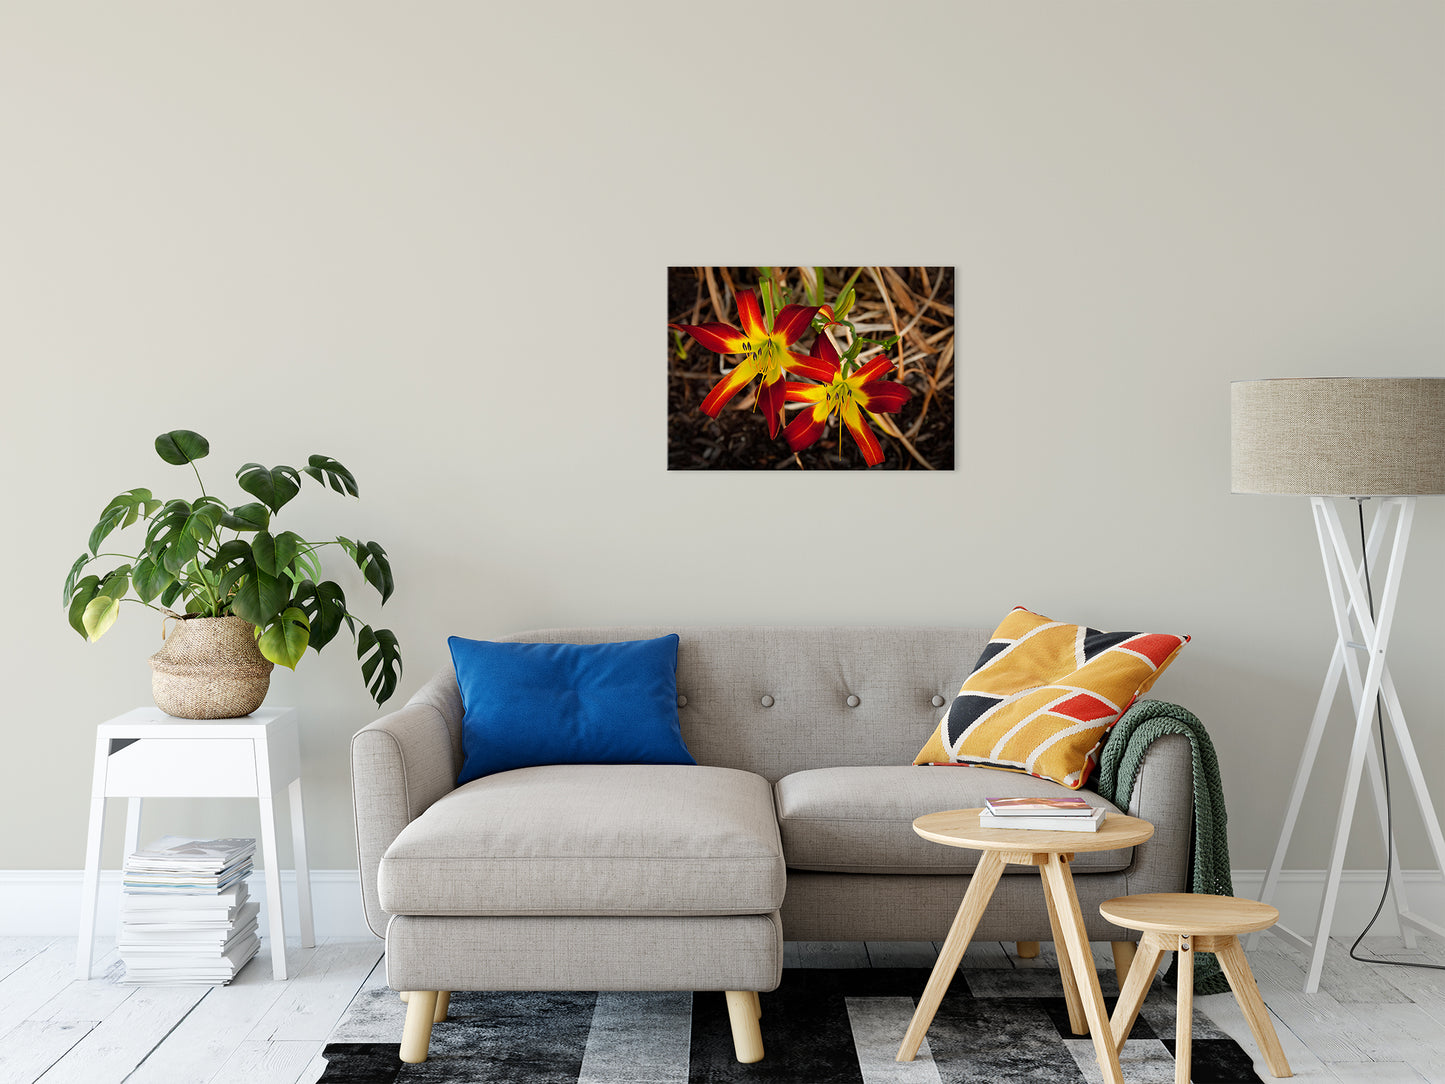 Royal Sunset Lily Nature / Floral Photo Fine Art Canvas Wall Art Prints 20" x 30" - PIPAFINEART